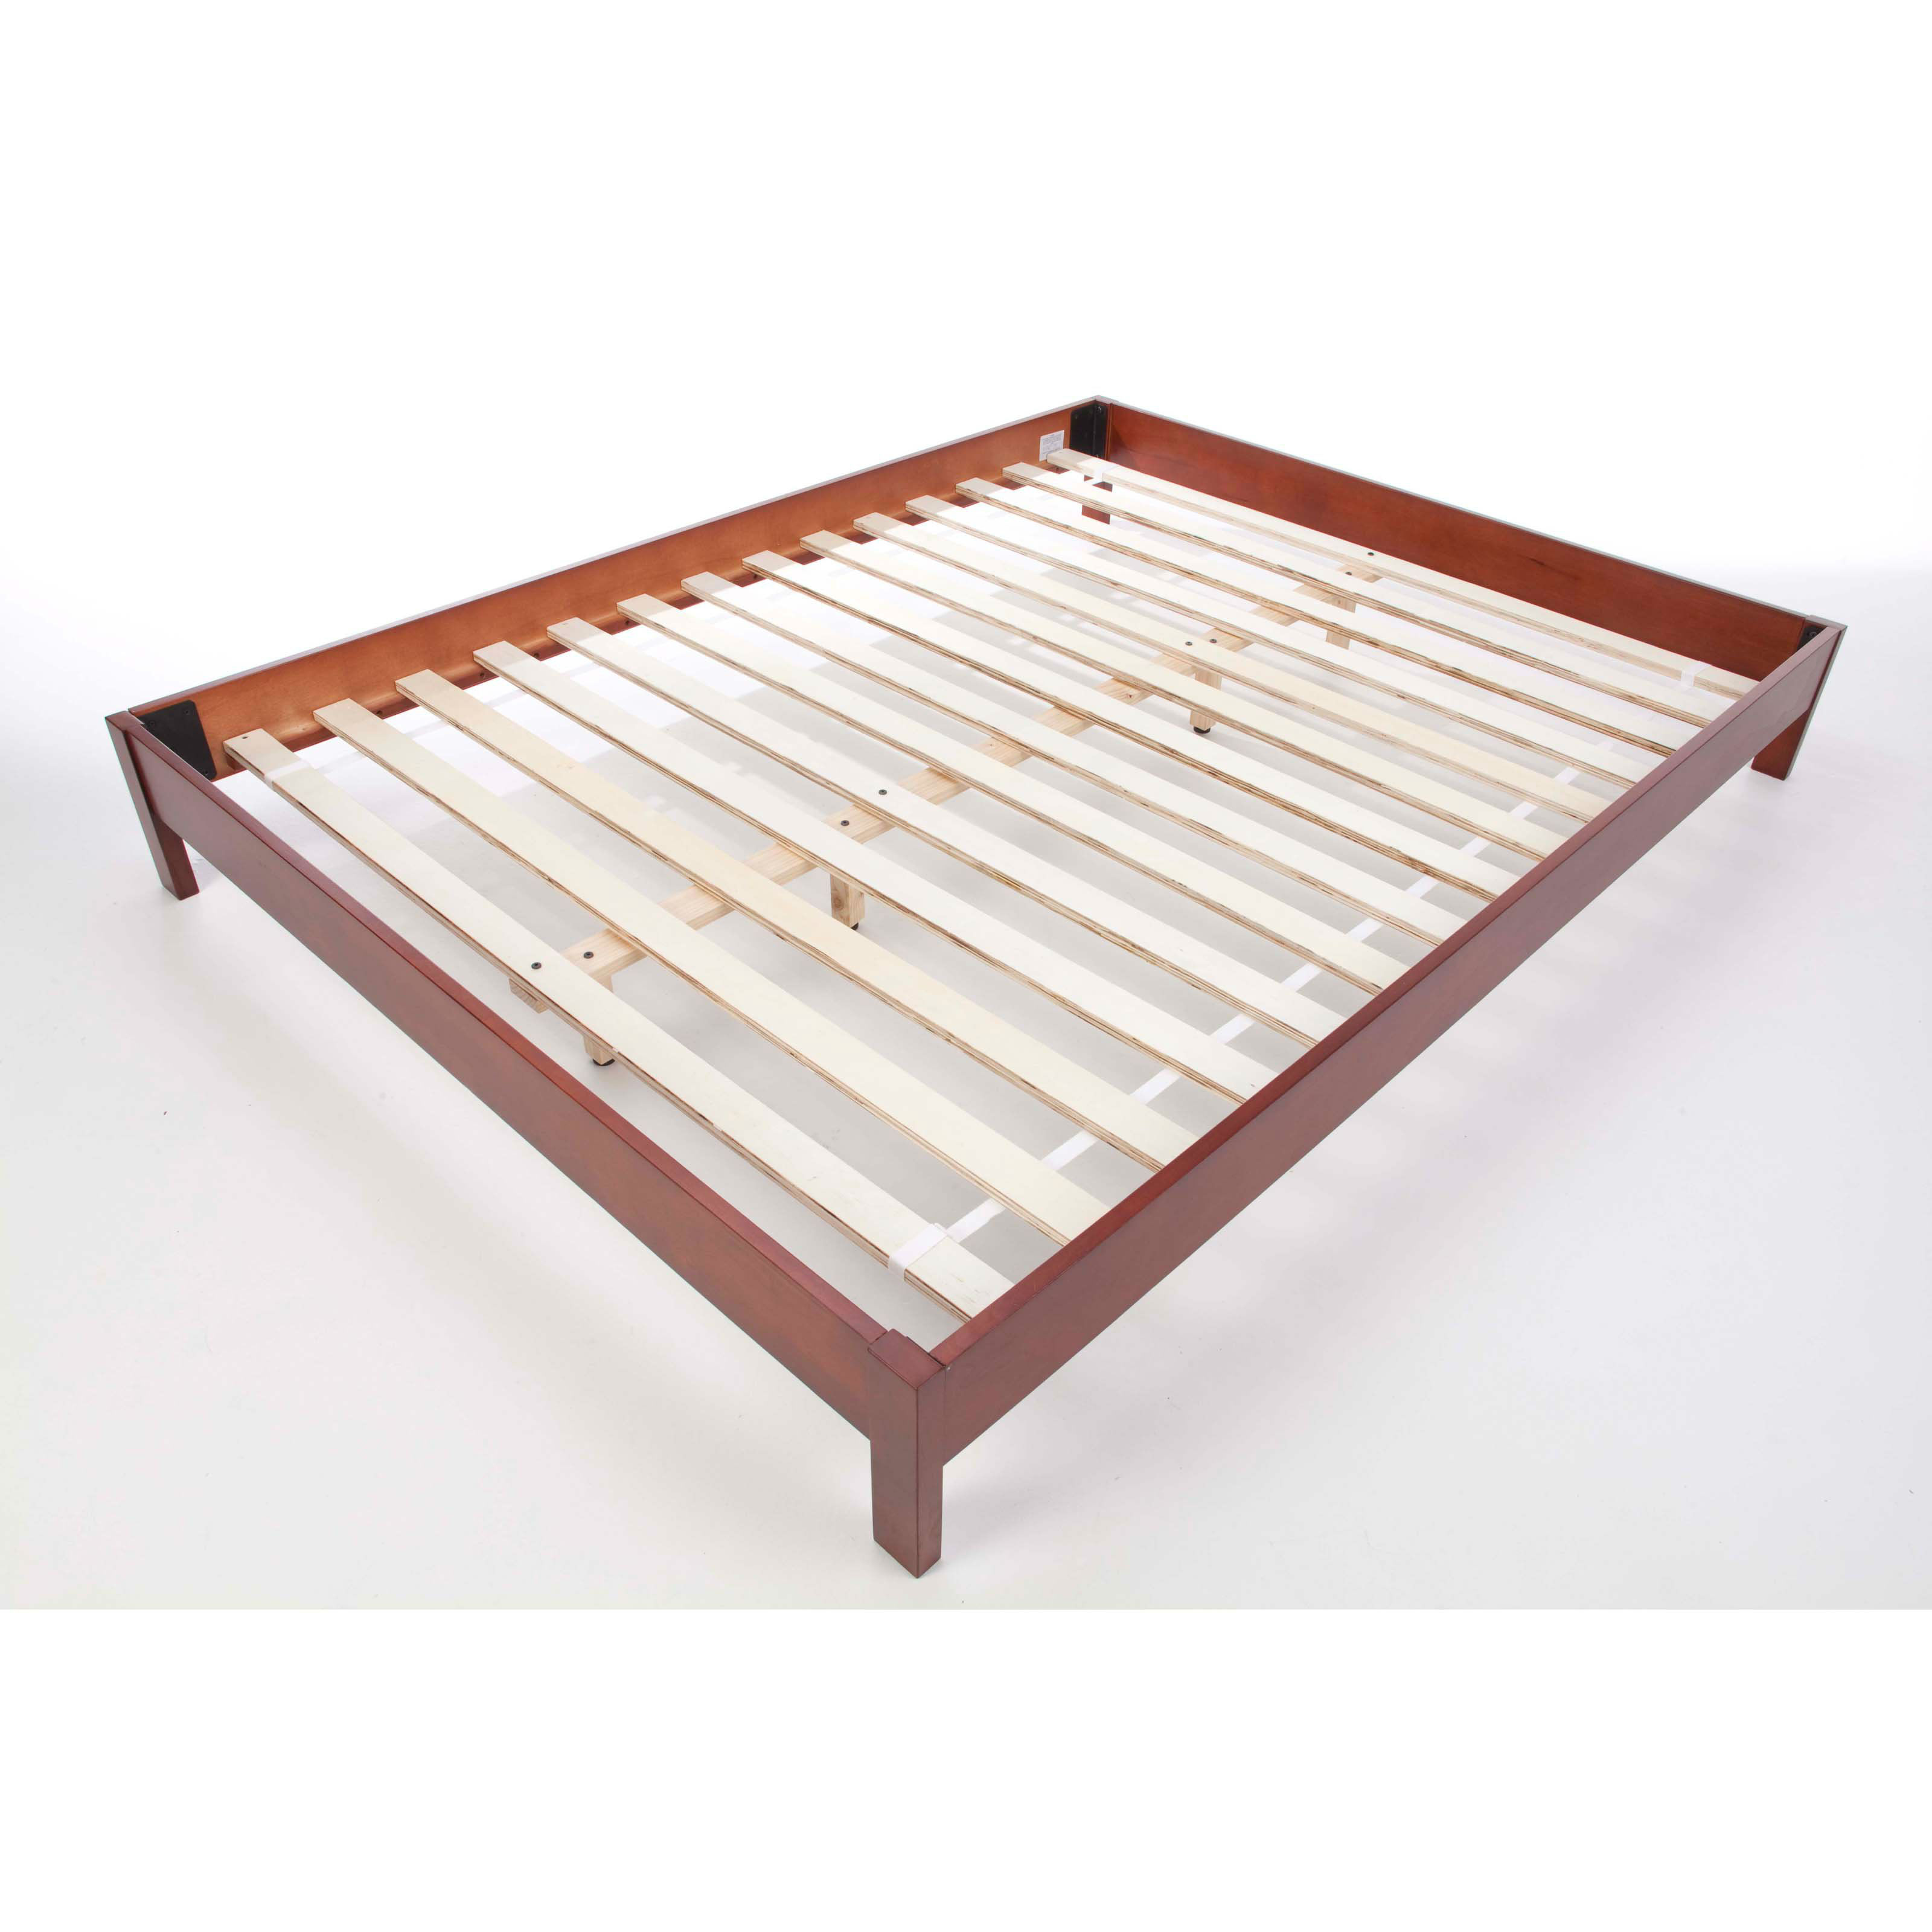 GreenHome123 Eco-Friendly Wooden Platform Bed Frame in Mahogany Wood Finish